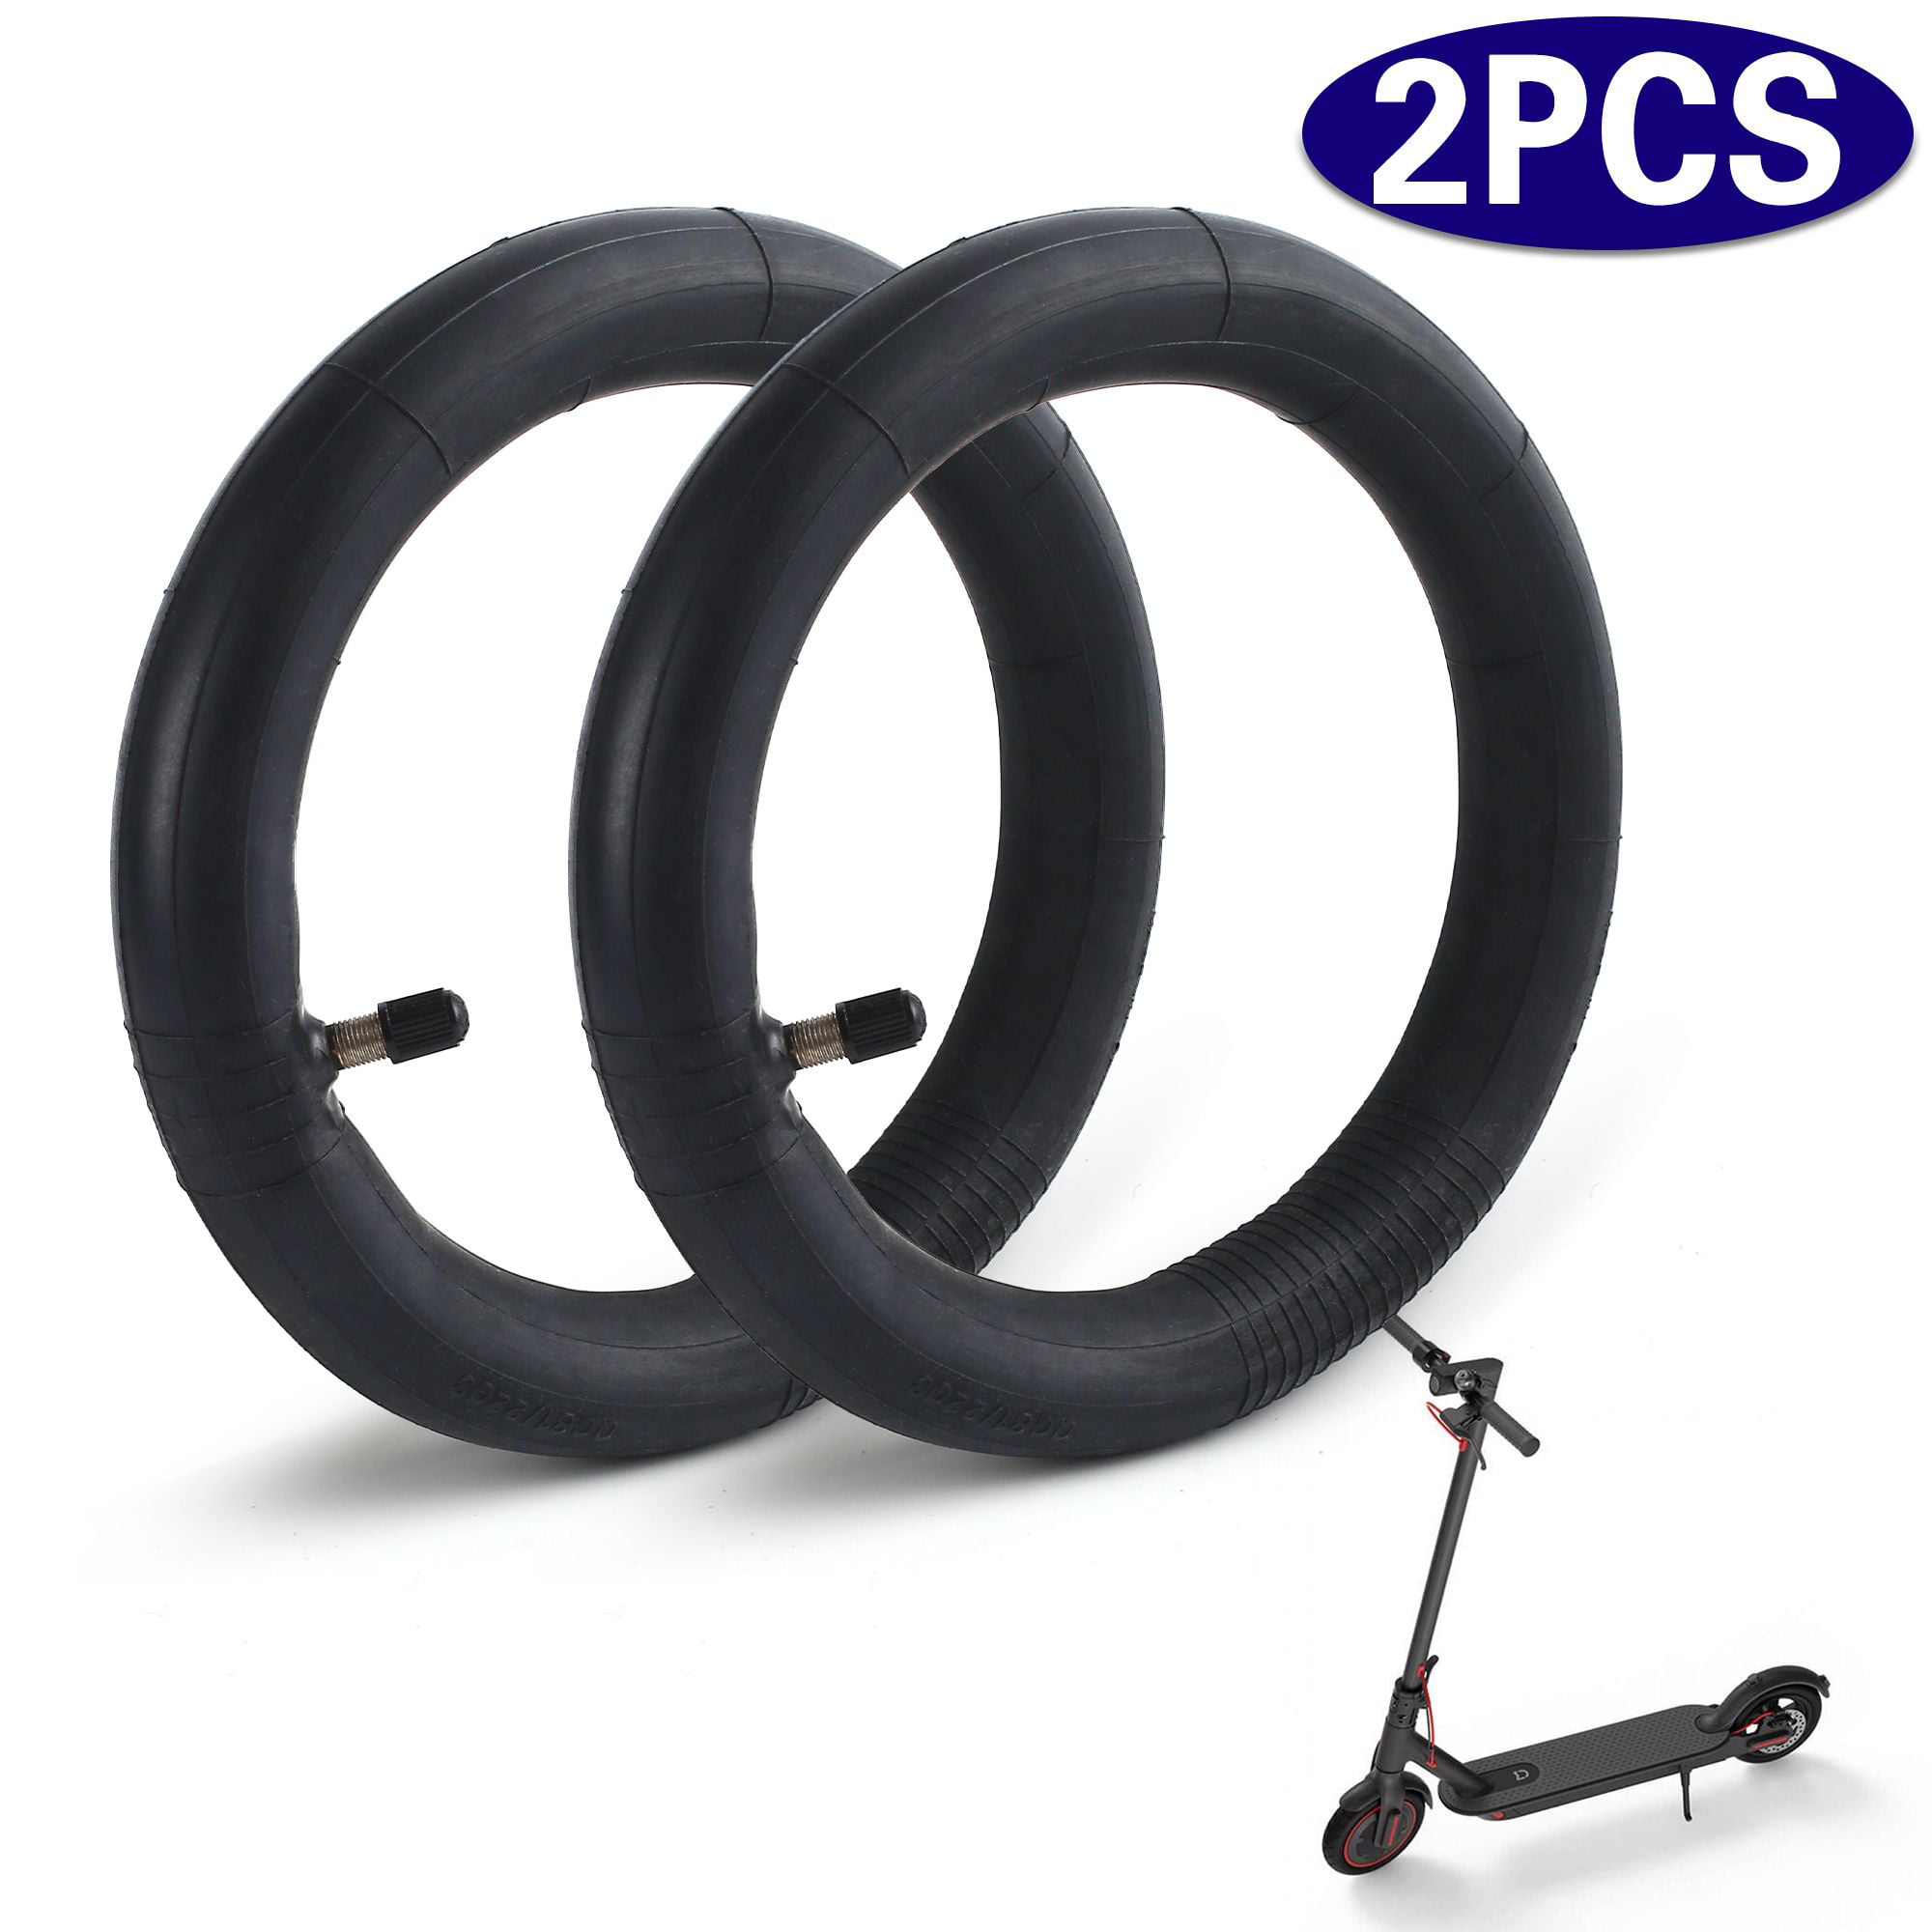 2 Pcs Tire Tube Replacement for Scooter Ourleeme Mi Scooter Inner Tube Electric Scooter Tire 8 1/2 2 Inner Tube 